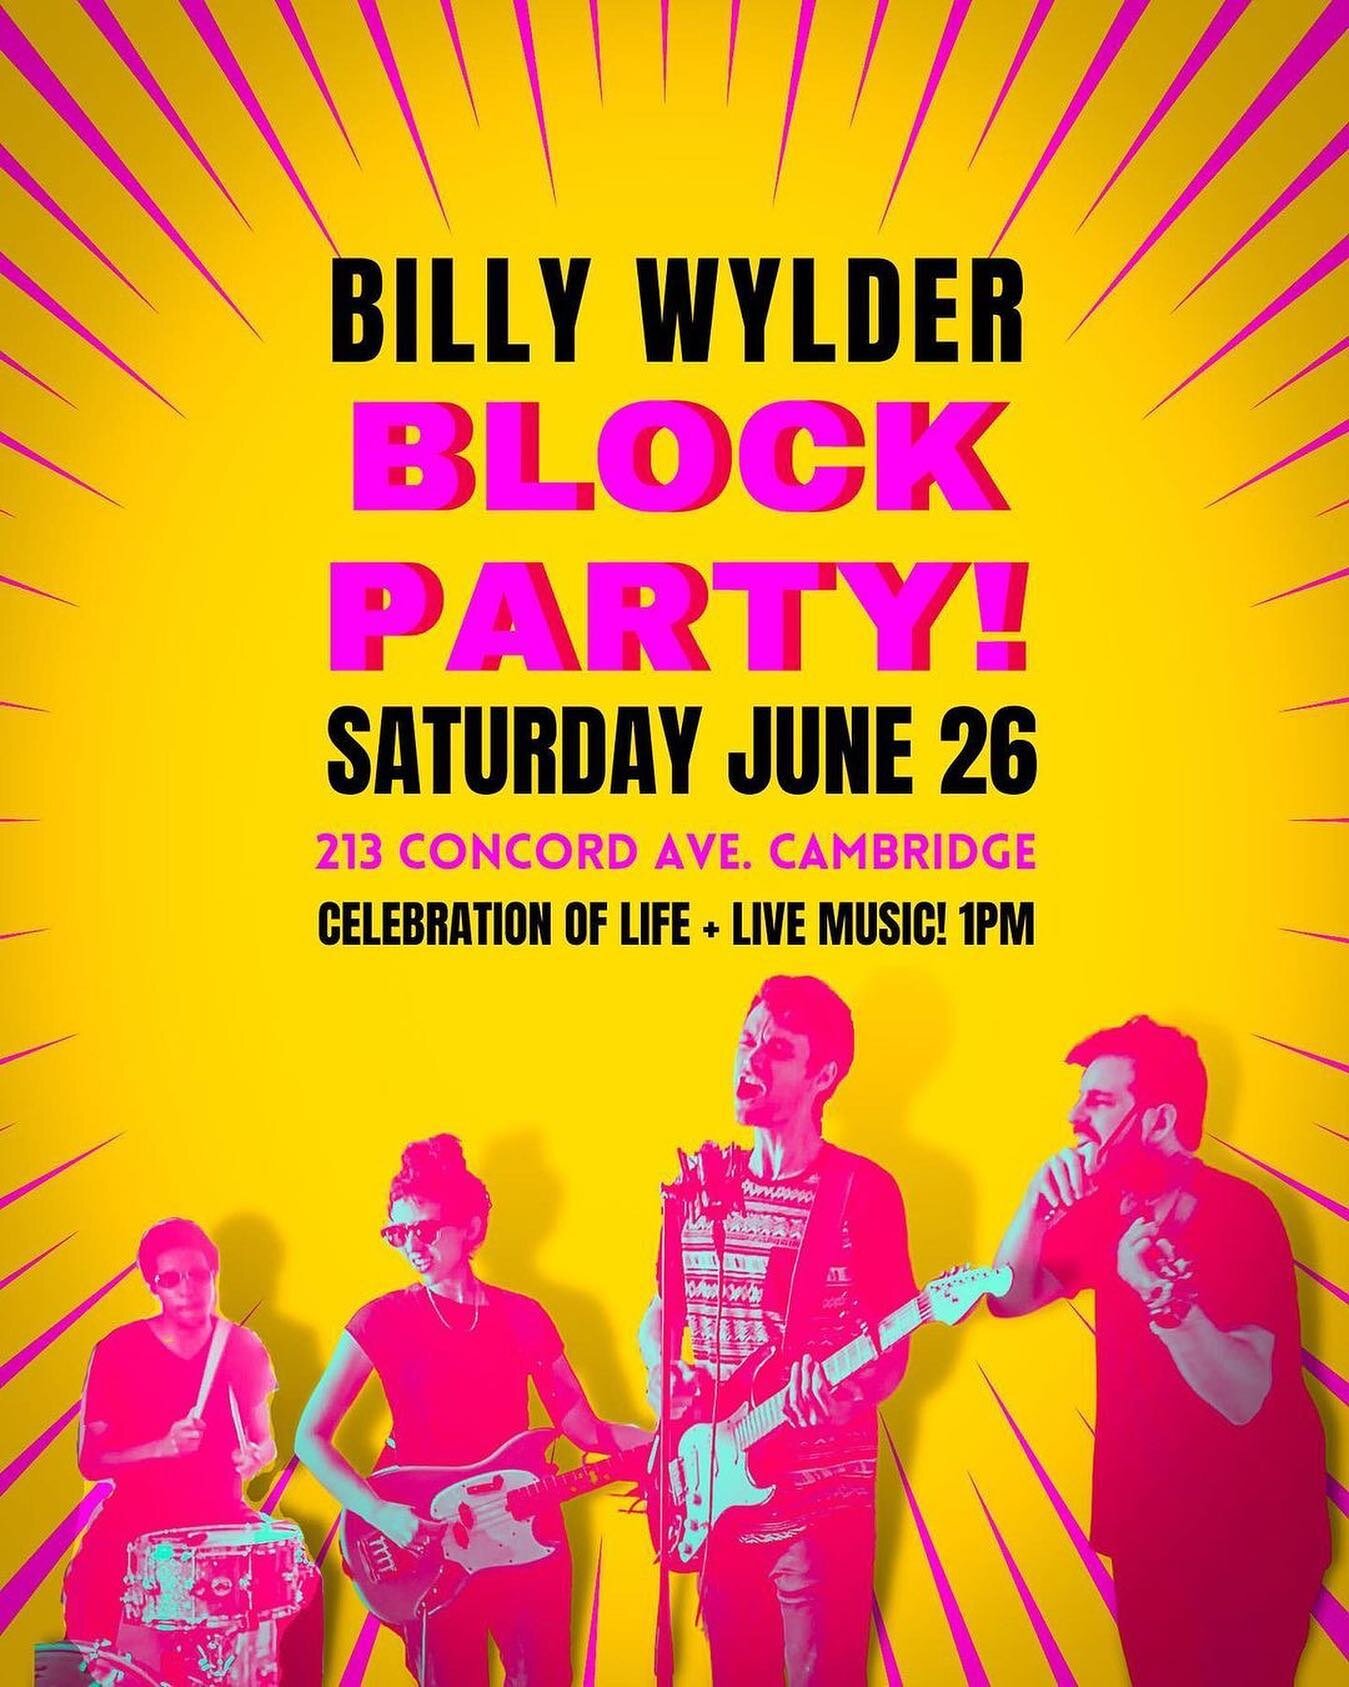 COME VIBE! In addition to my jazz gig tomorrow, I&rsquo;m playing an outdoor block party in Cambridge on Saturday!

#repost @billywylder
・・・
We&rsquo;re throwing a spontaneous hometown BLOCK PARTY this Saturday! A celebration of life, community, and 